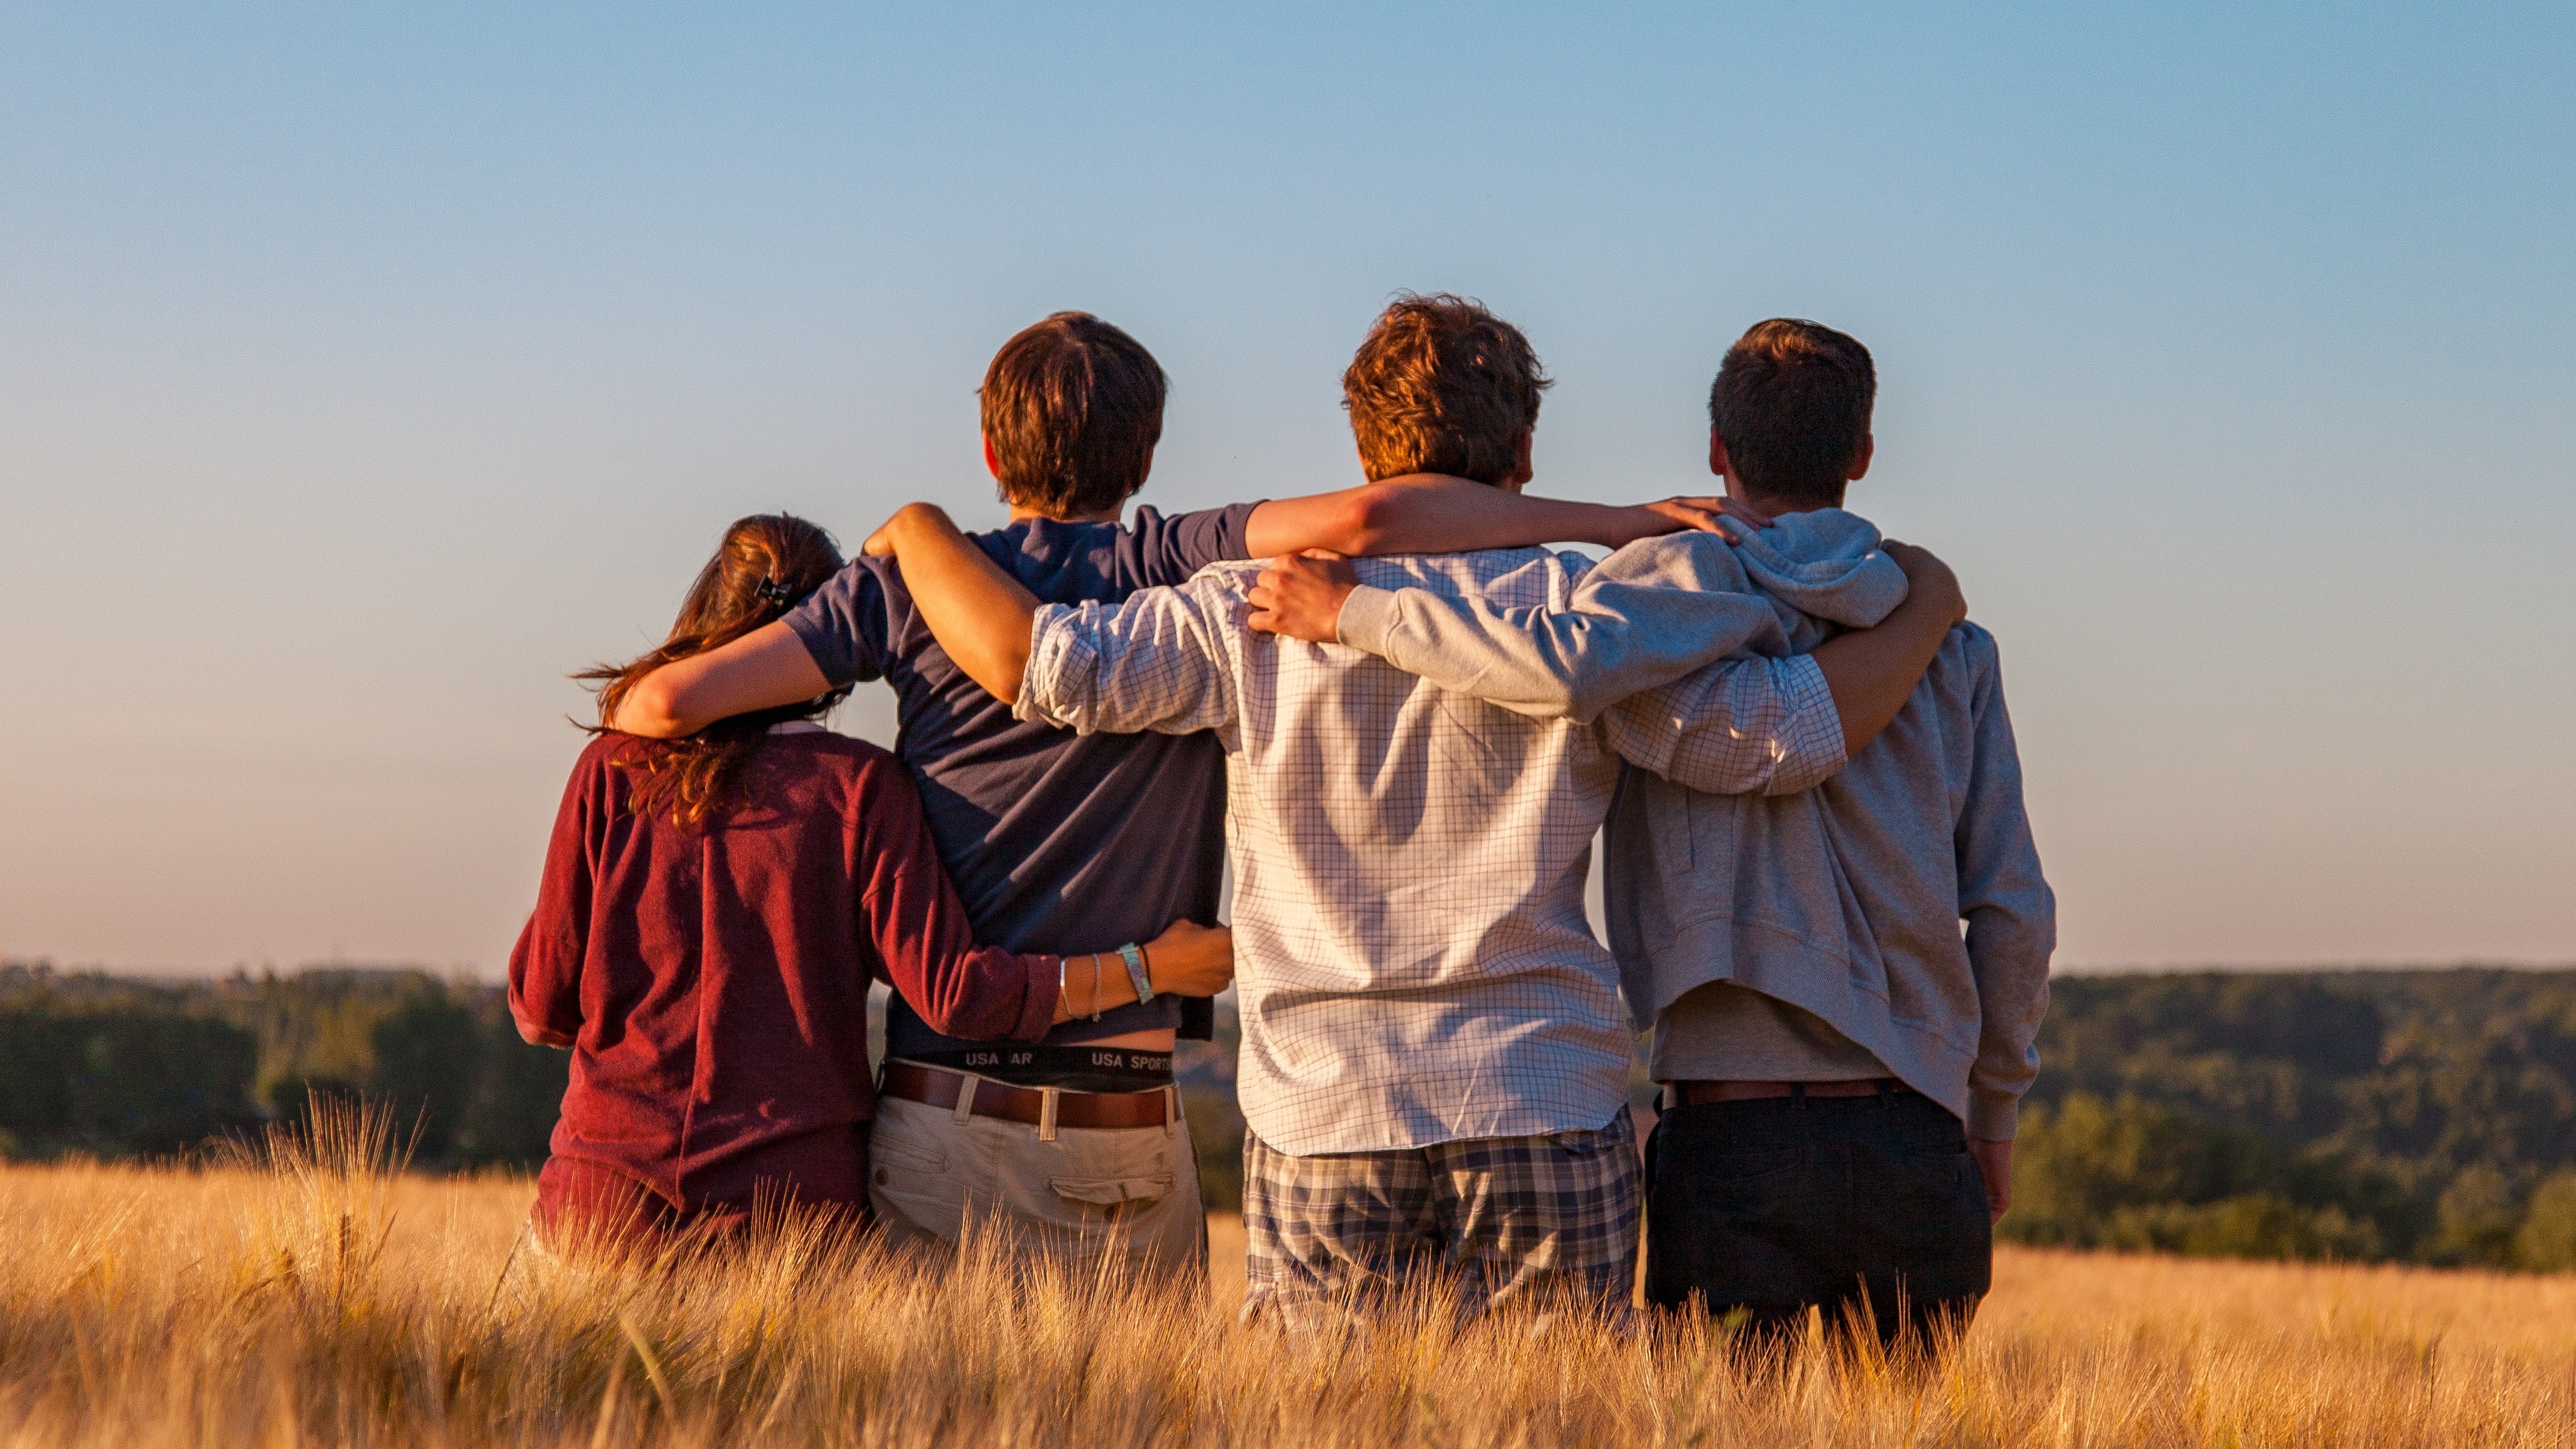 Four youths link arms around each other's backs while standing in a wheat field looking away from the camera towards woods.